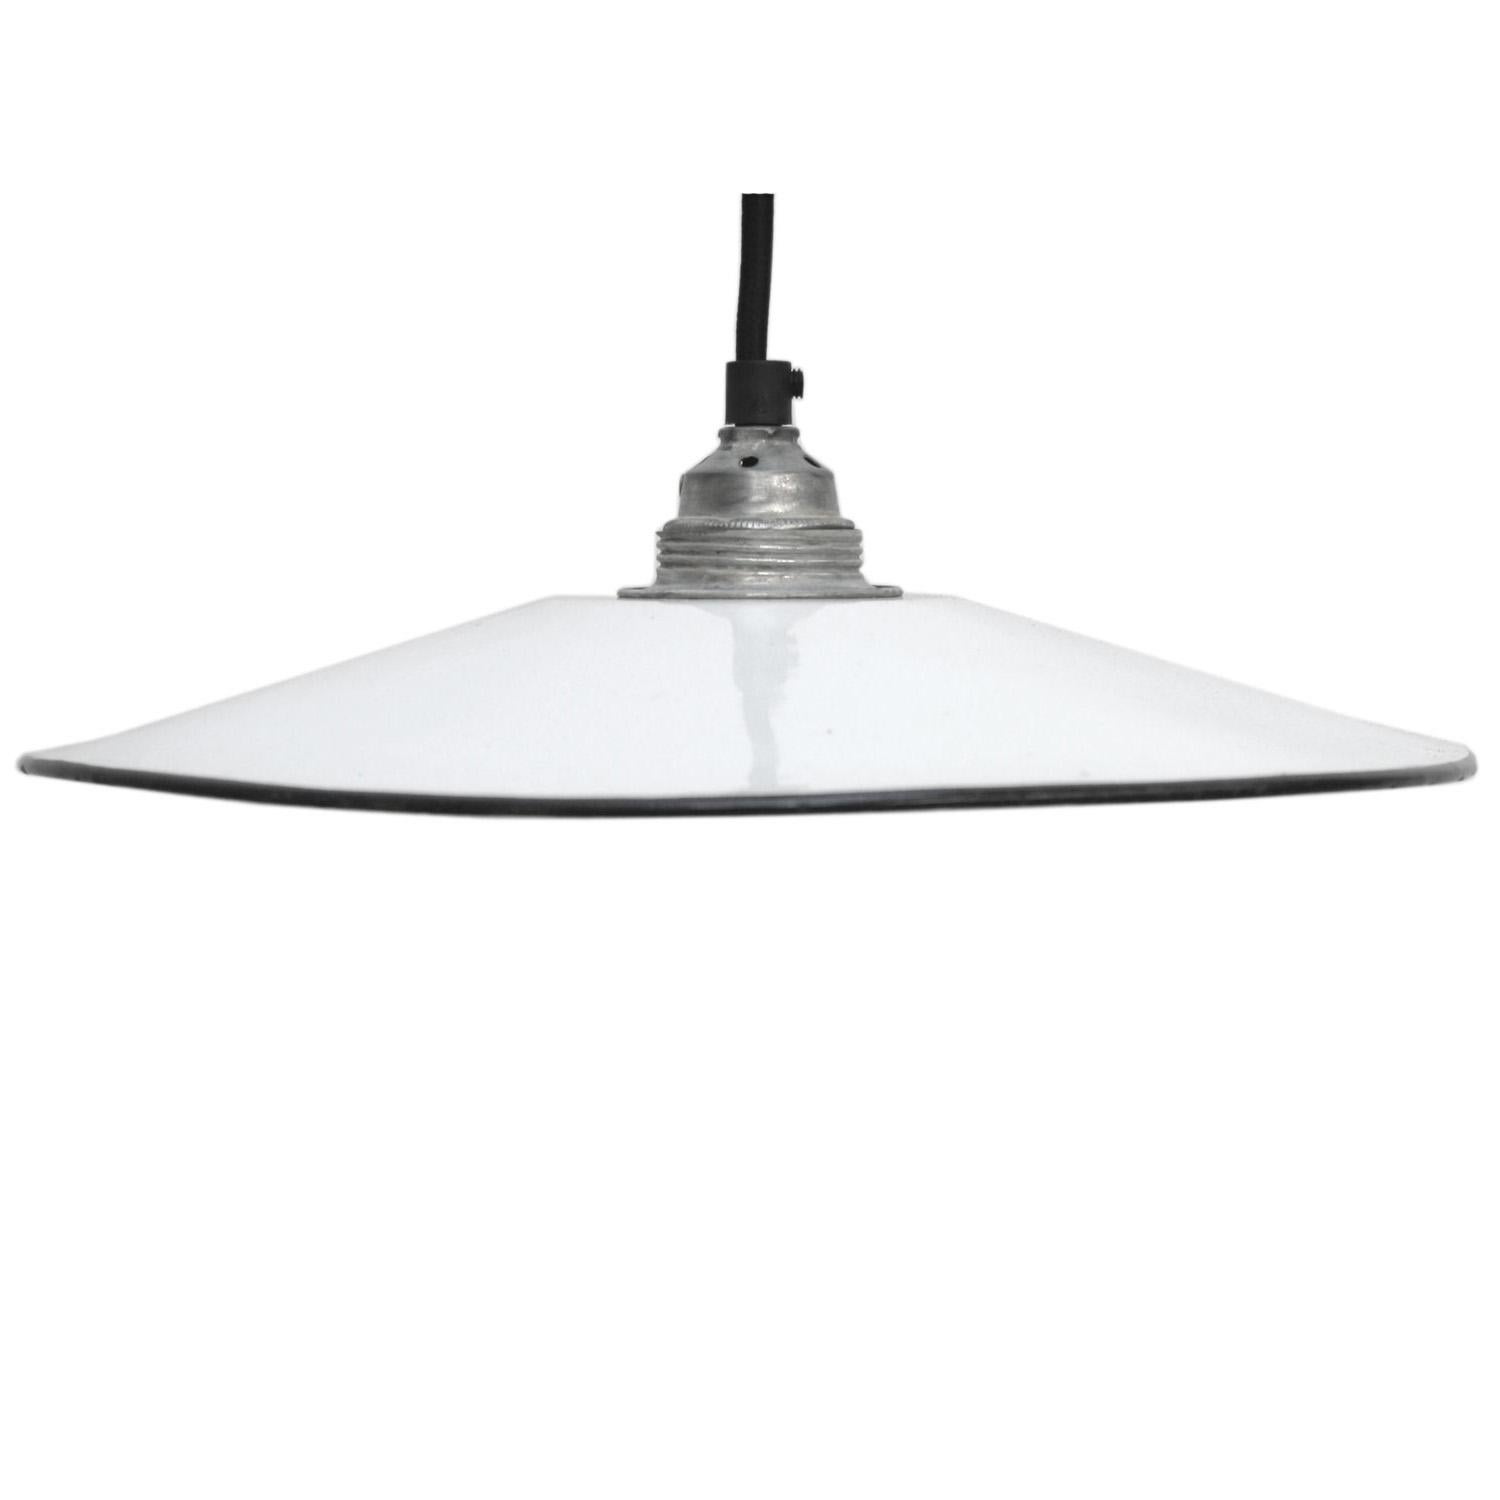 Small French Industrial pendant.

Weight 0.7 kg / 1.5 lb

Priced per individual item. All lamps have been made suitable by international standards for incandescent light bulbs, energy-efficient and LED bulbs. E26/E27 bulb holders and new 110